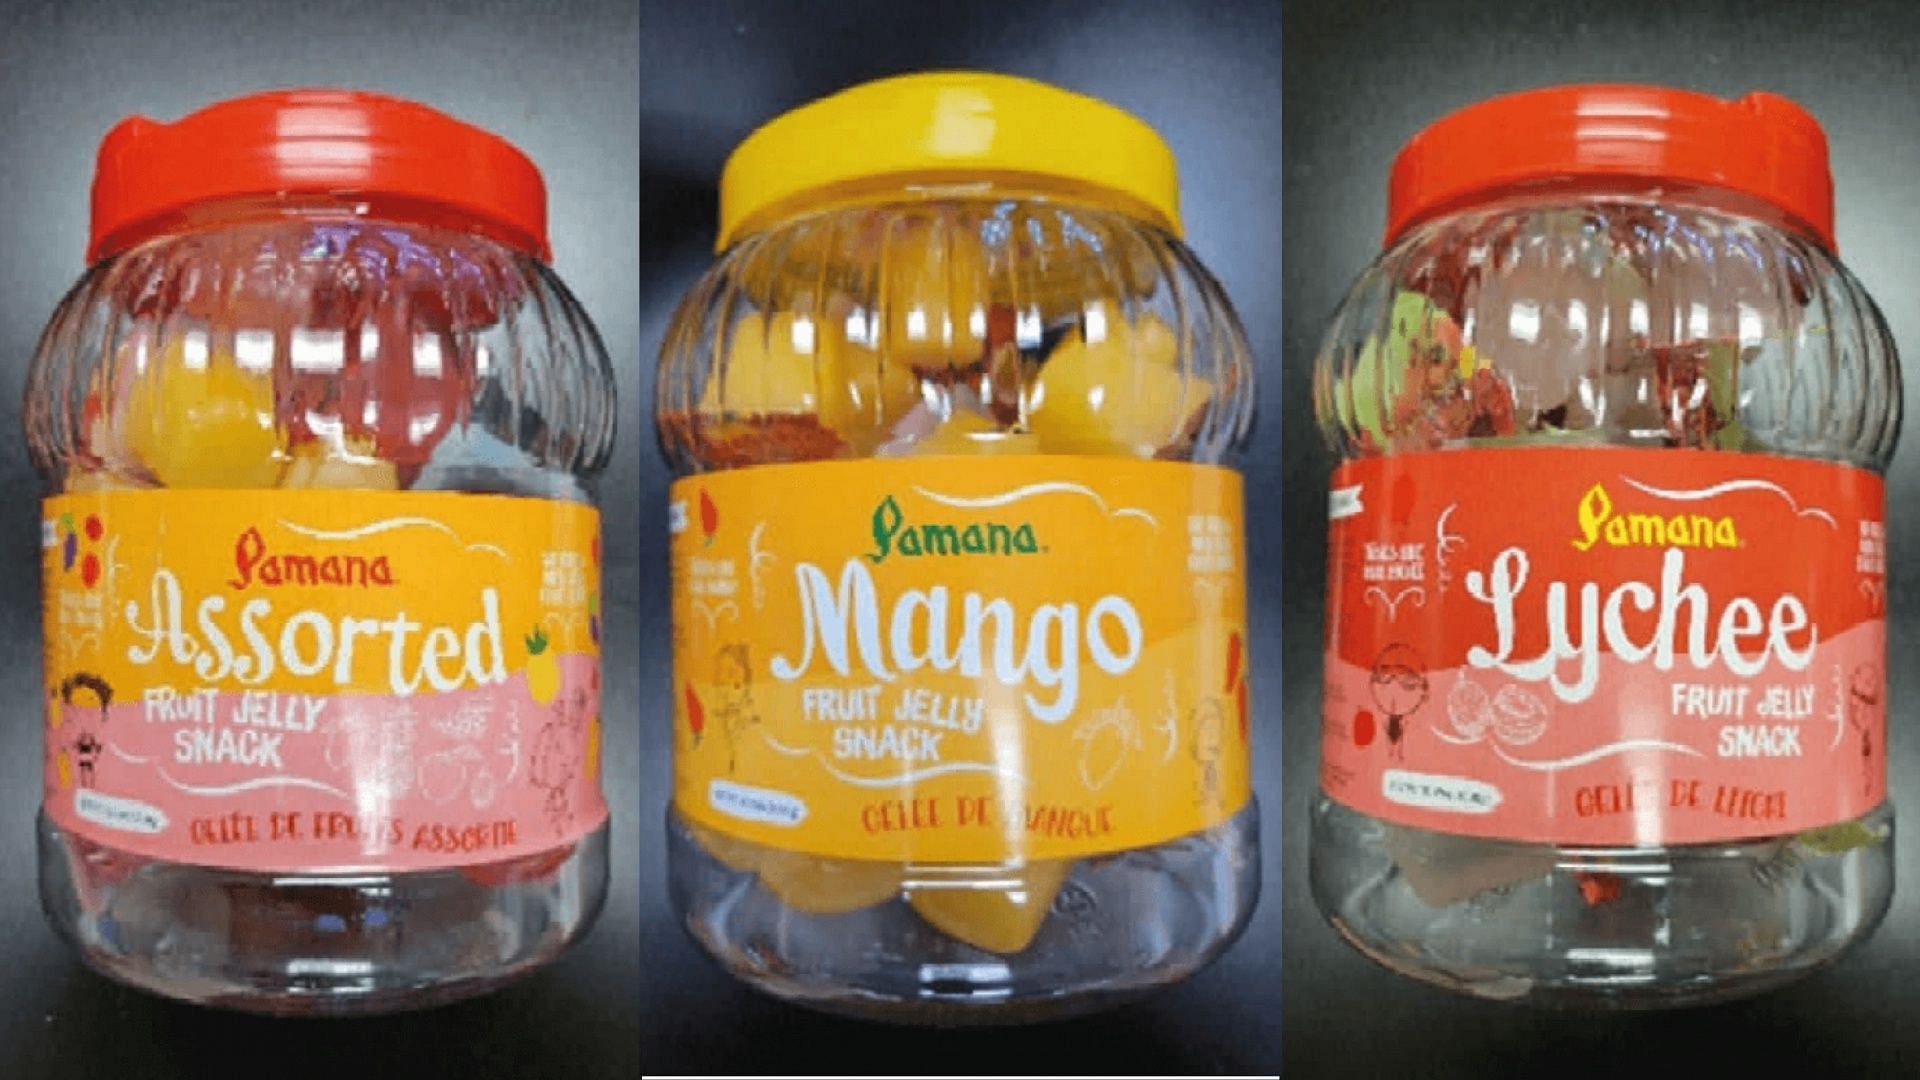 Pamana-branded Mini Fruit Jelly Cup products are being recalled from across the U.S. as they pose potential risks of choking hazards (Image via Food and Drug Administration)